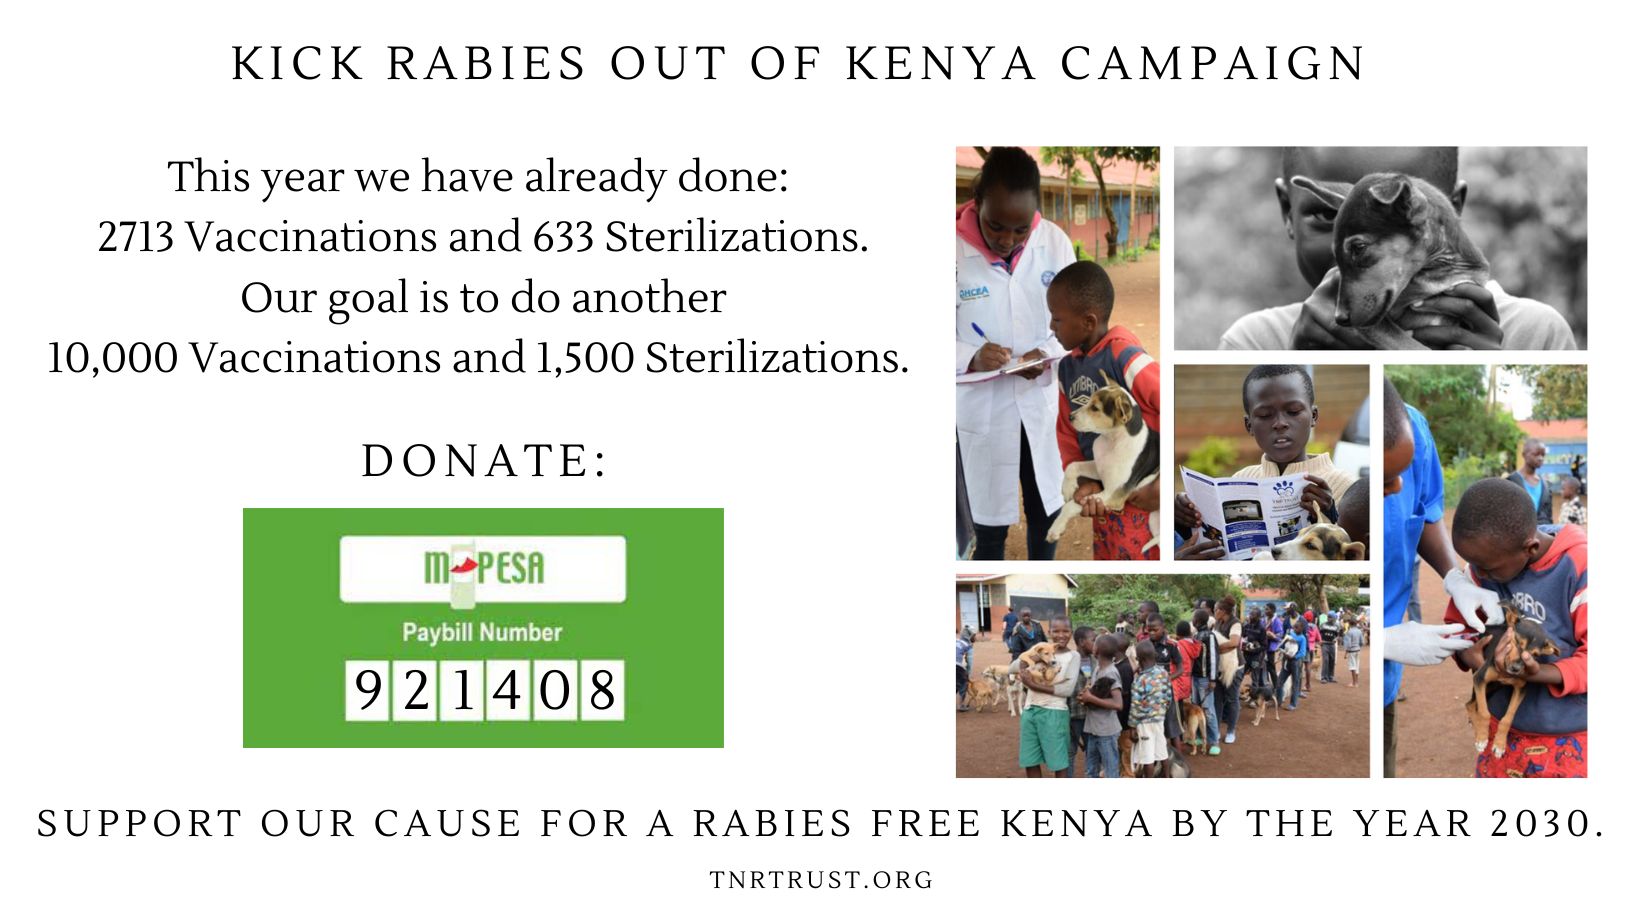 Support Our Cause For Rabies Free Kenya By 2030